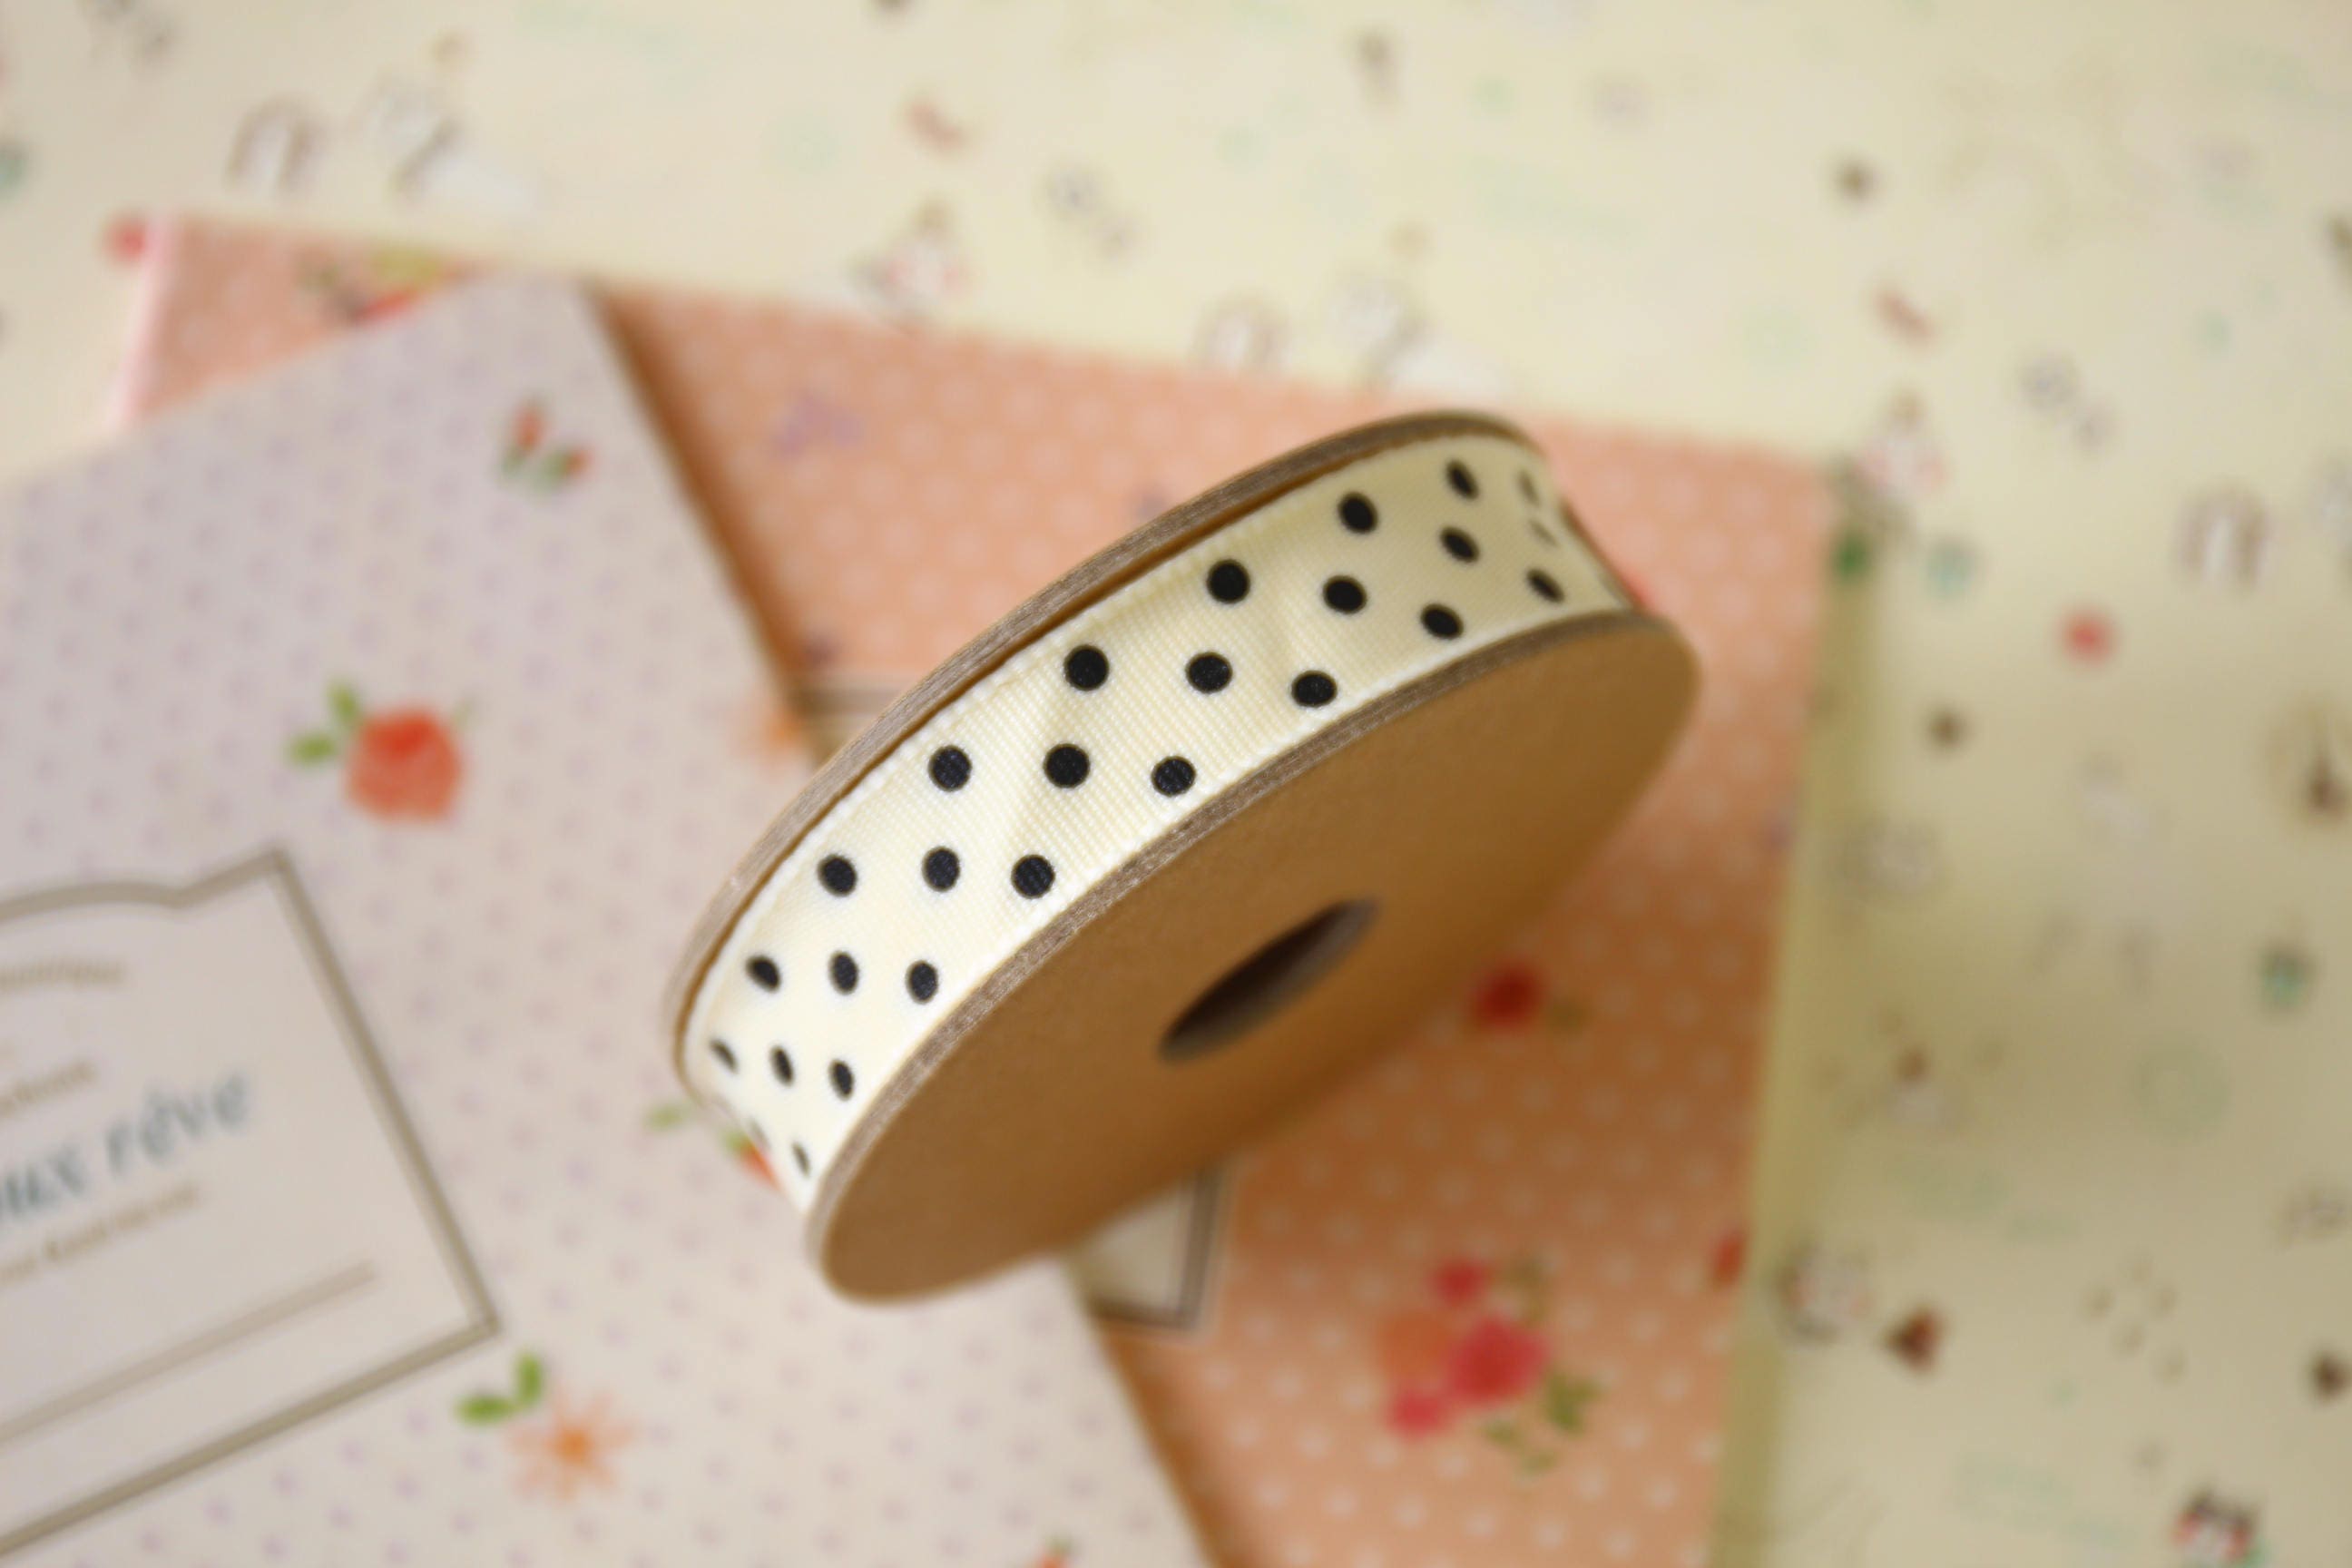 Packing Tape, Pink Tape With Gold Polka, Packaging Tape, Polka Dot,  Recycled Materials, Sealing Tape, Mailing, Postal 